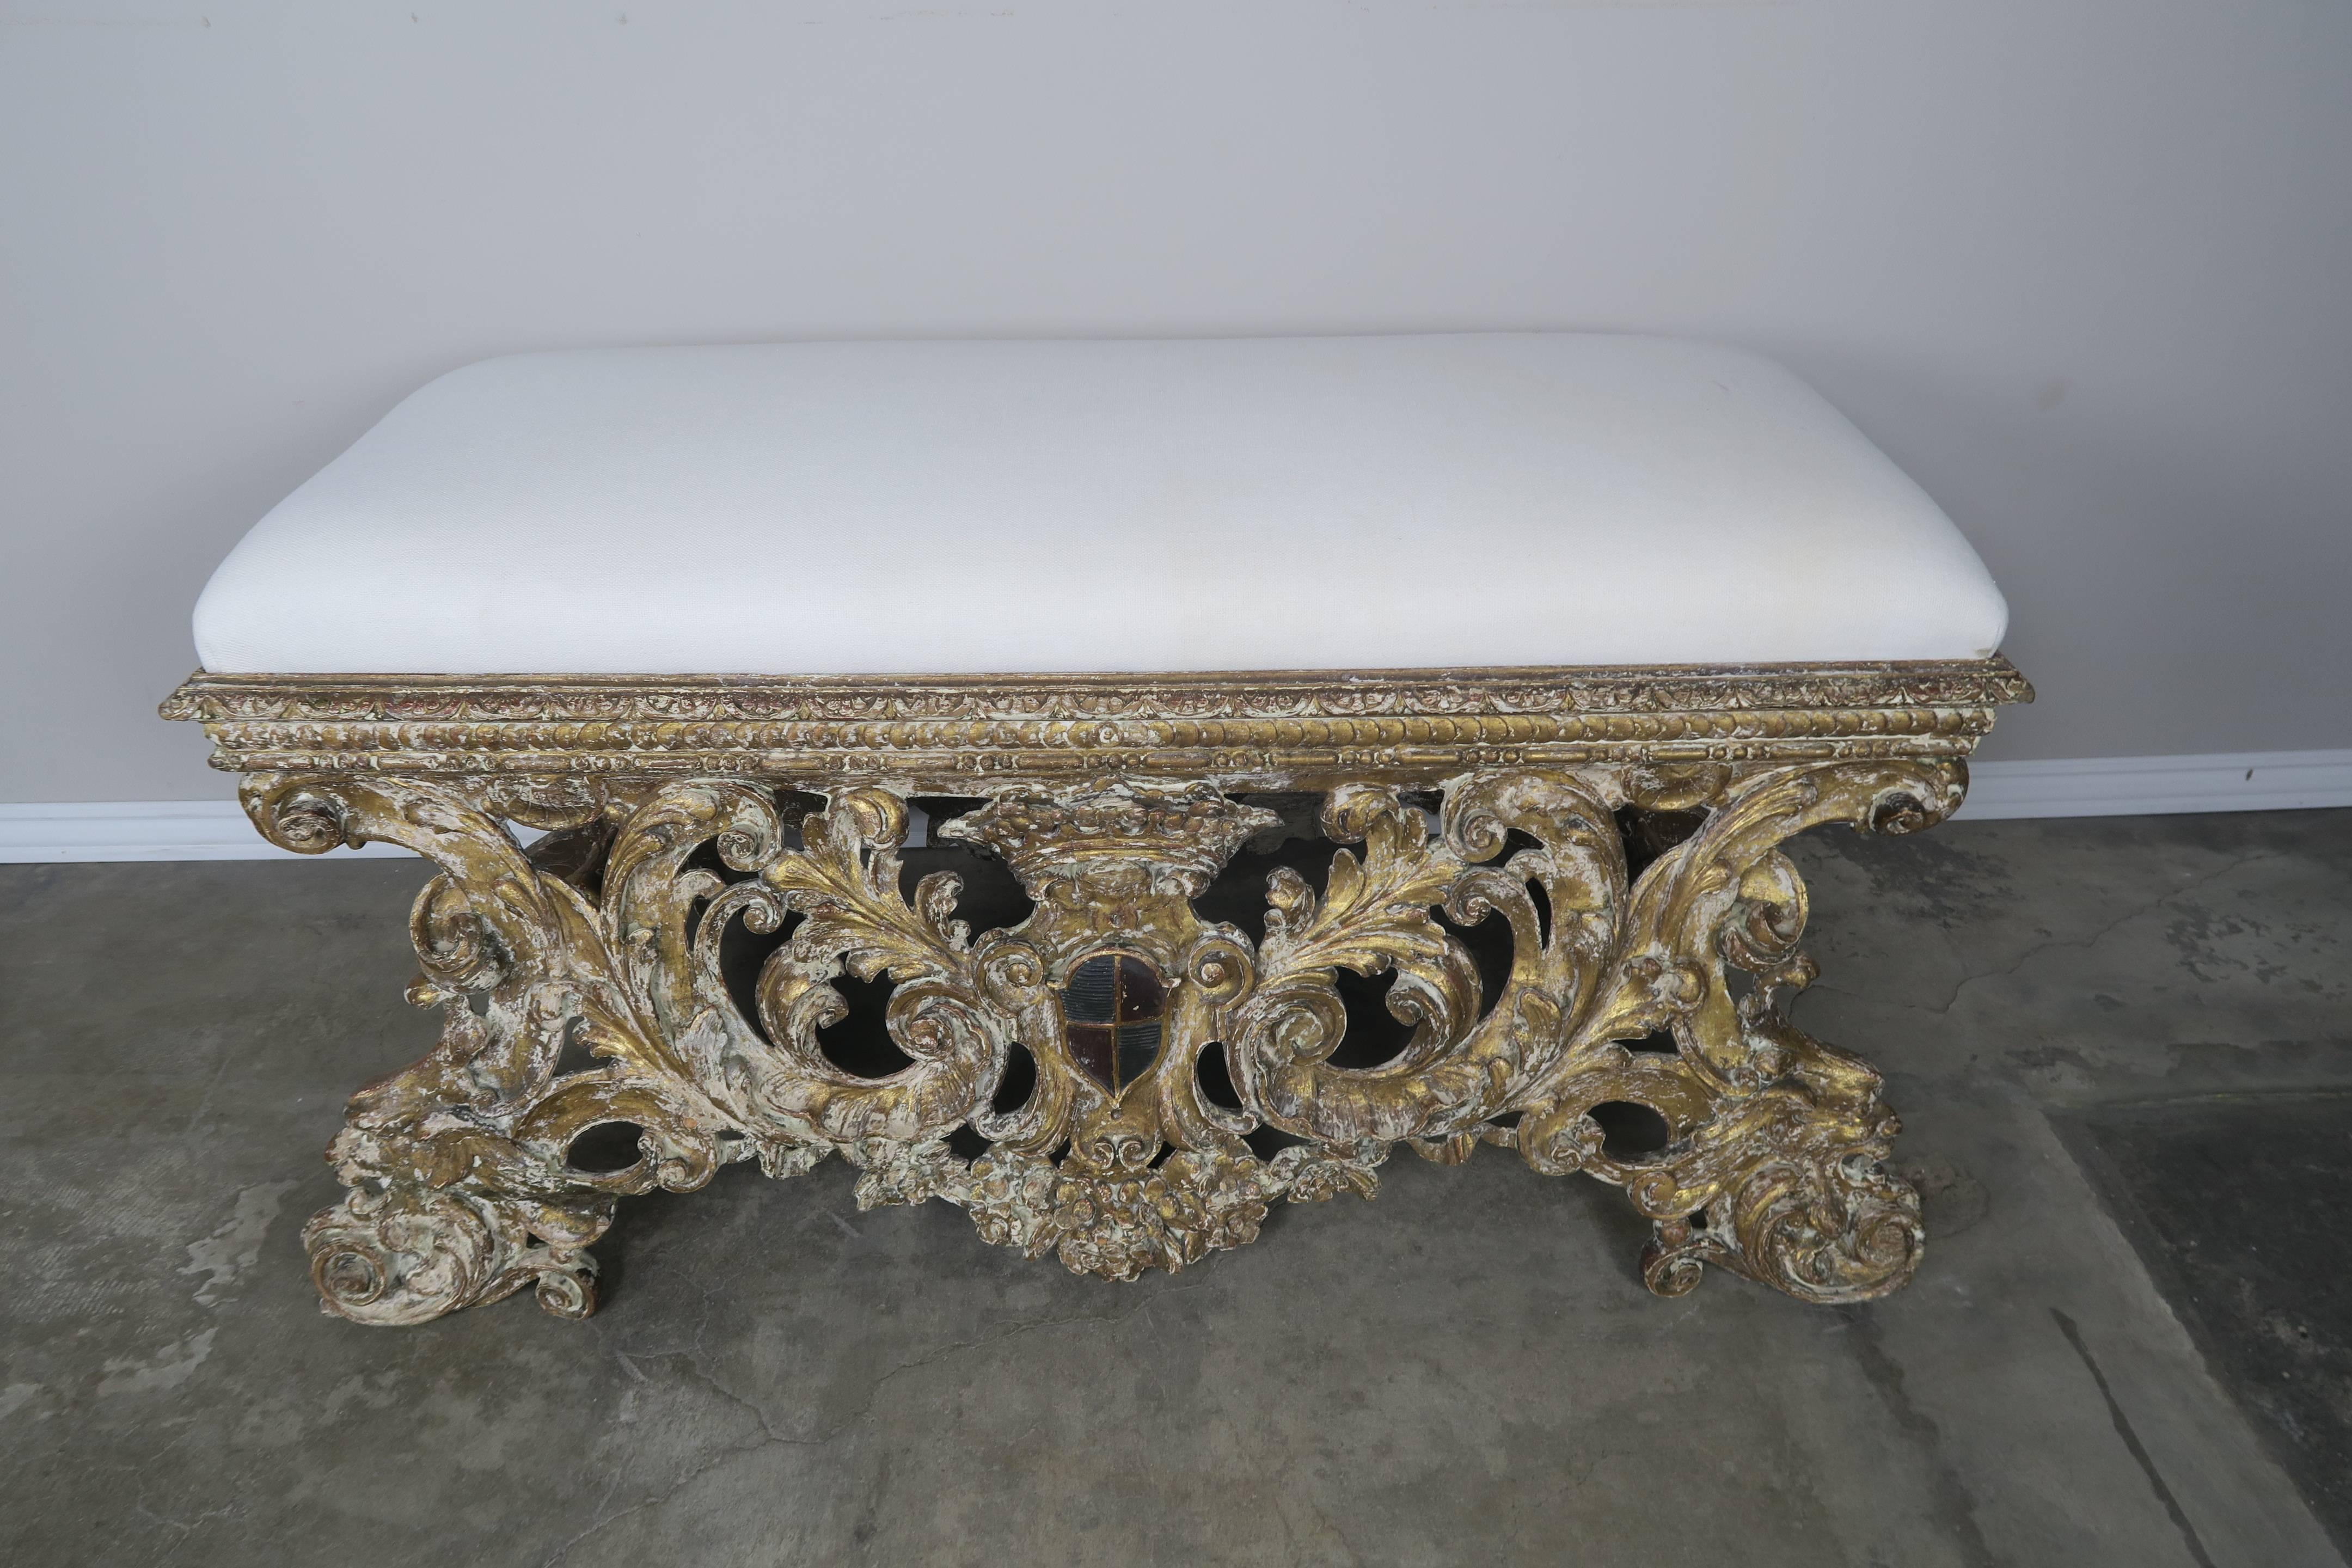 18th century, Italian Baroque style bench carved in wood with swirling acanthus leaves throughout and a center painted coat of arms and crown. Beautiful distressed gold gilt finish. Newly upholstered in a linen textile.